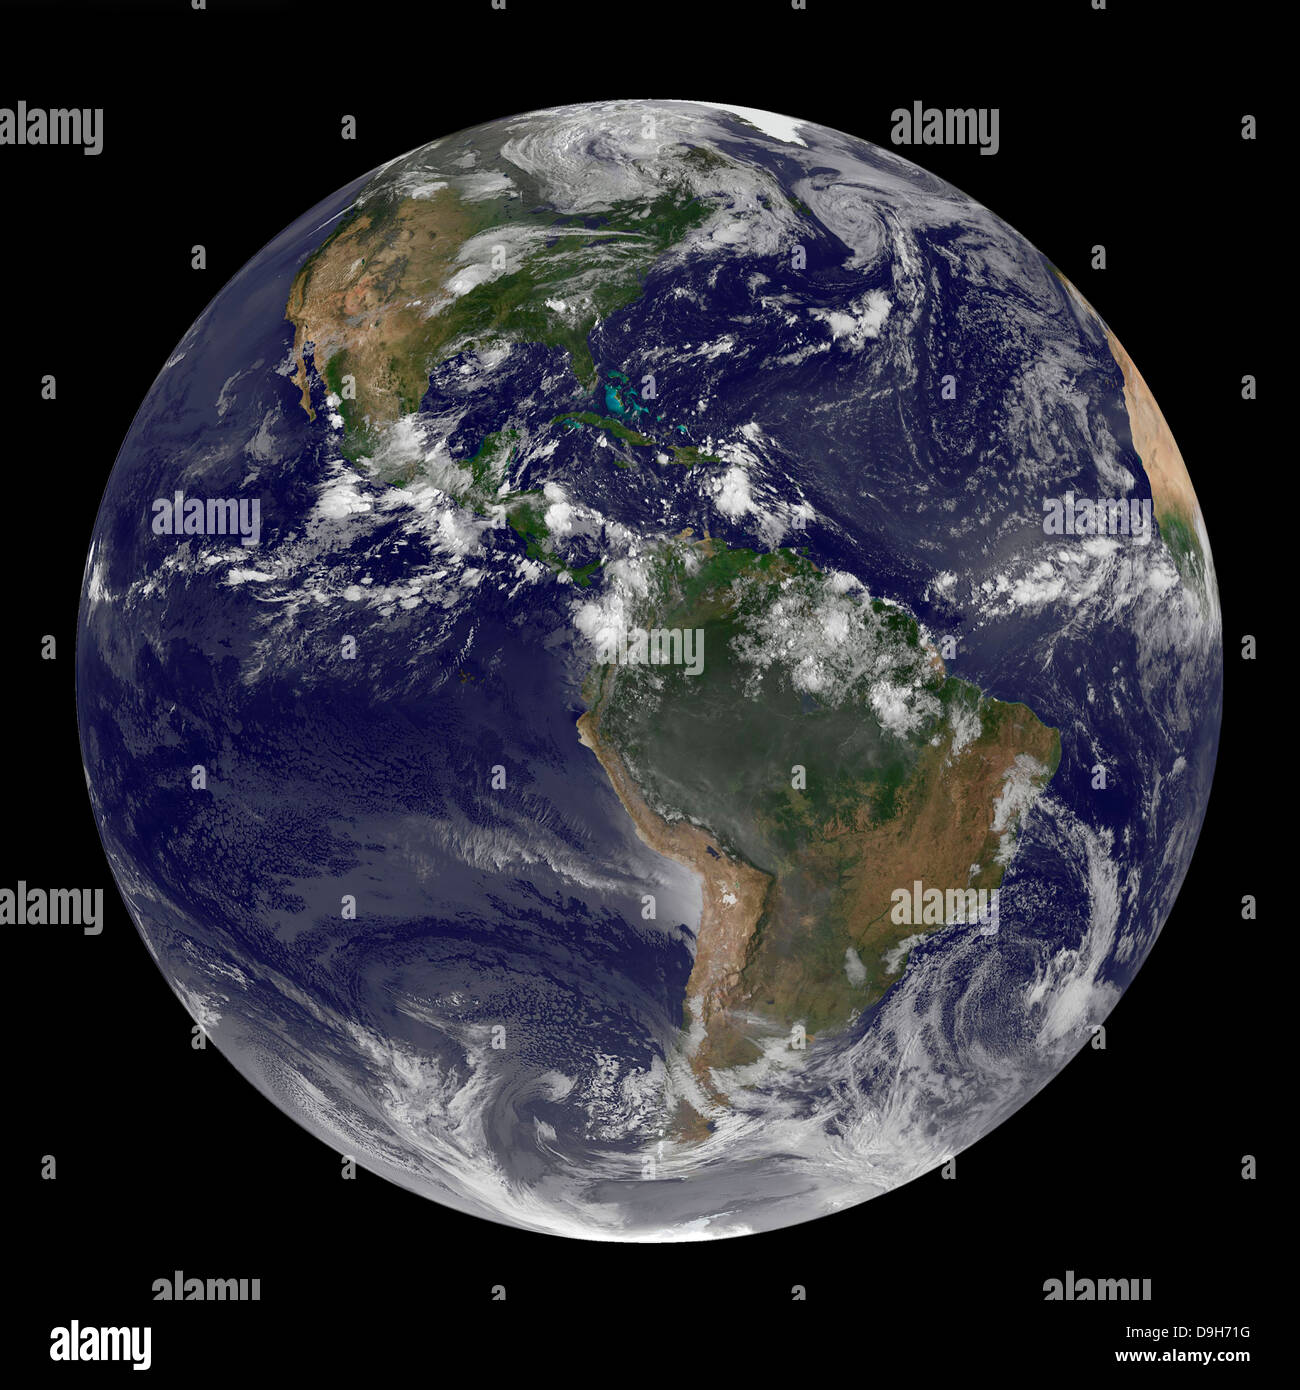 Full Earth showing North and South America on August 17, 2010. Stock Photo